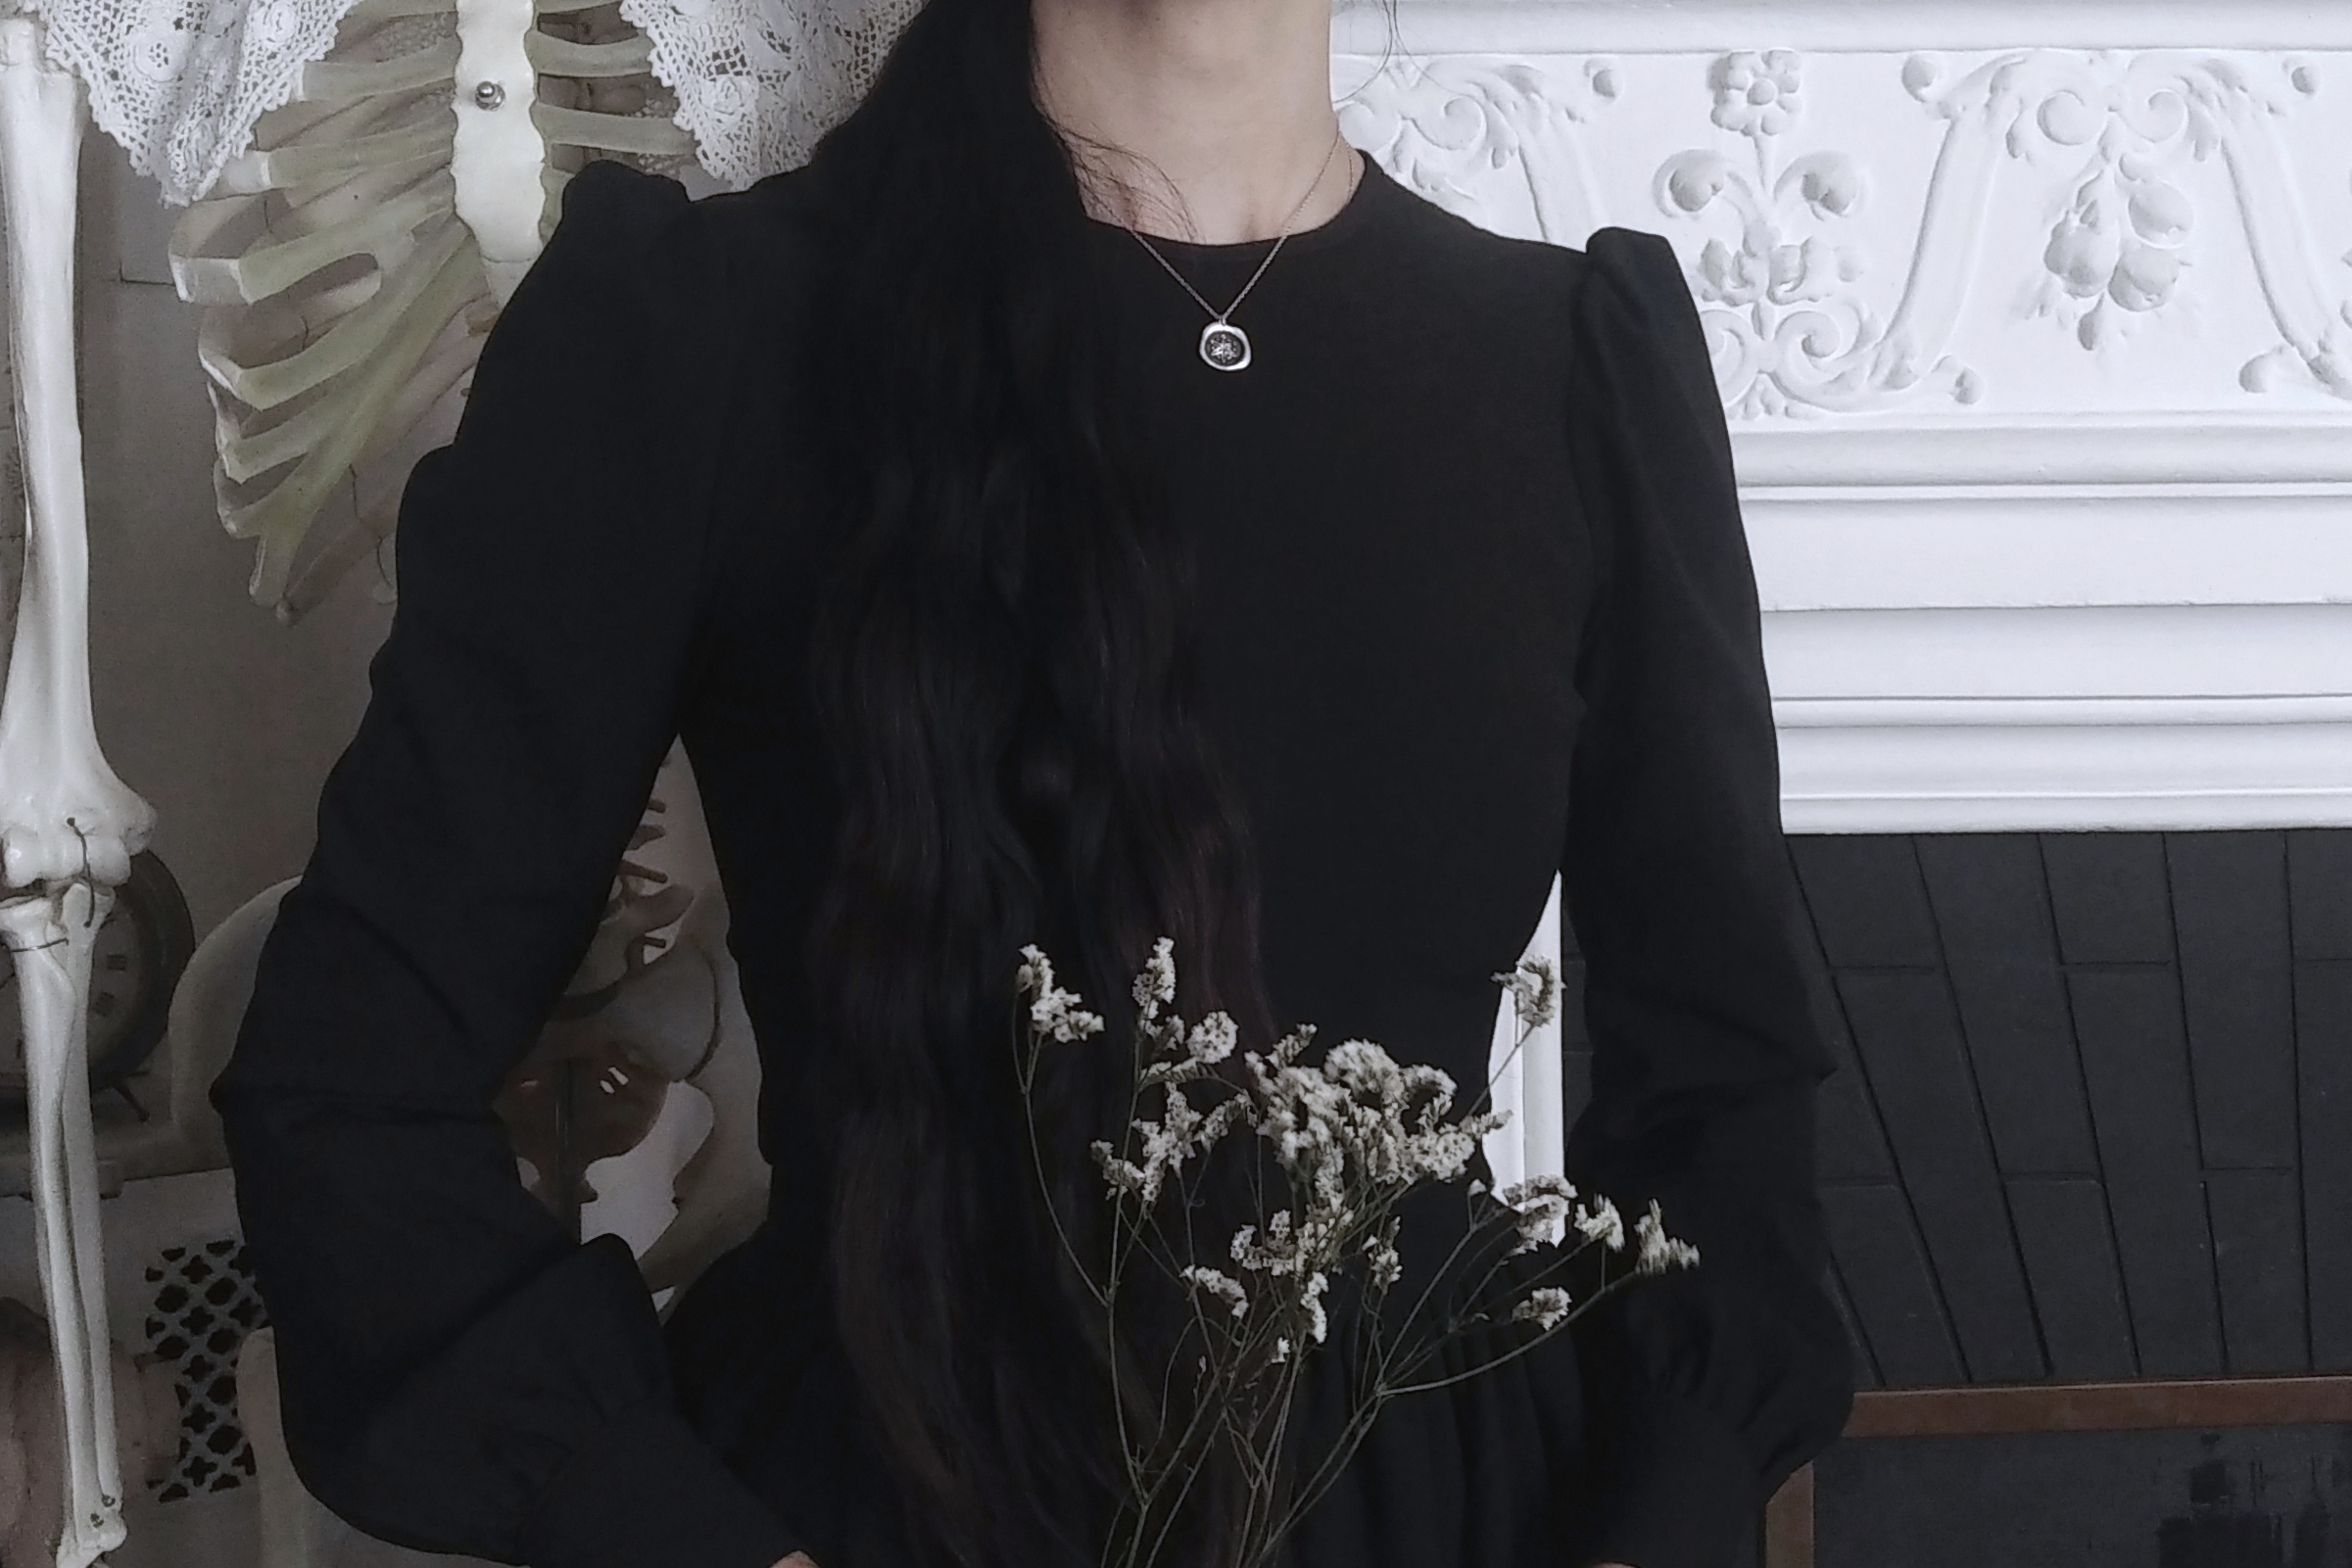 Woman in black dress wearing a Silver wax-seal inspired jewel, with a Daisy Wheel / witches mark